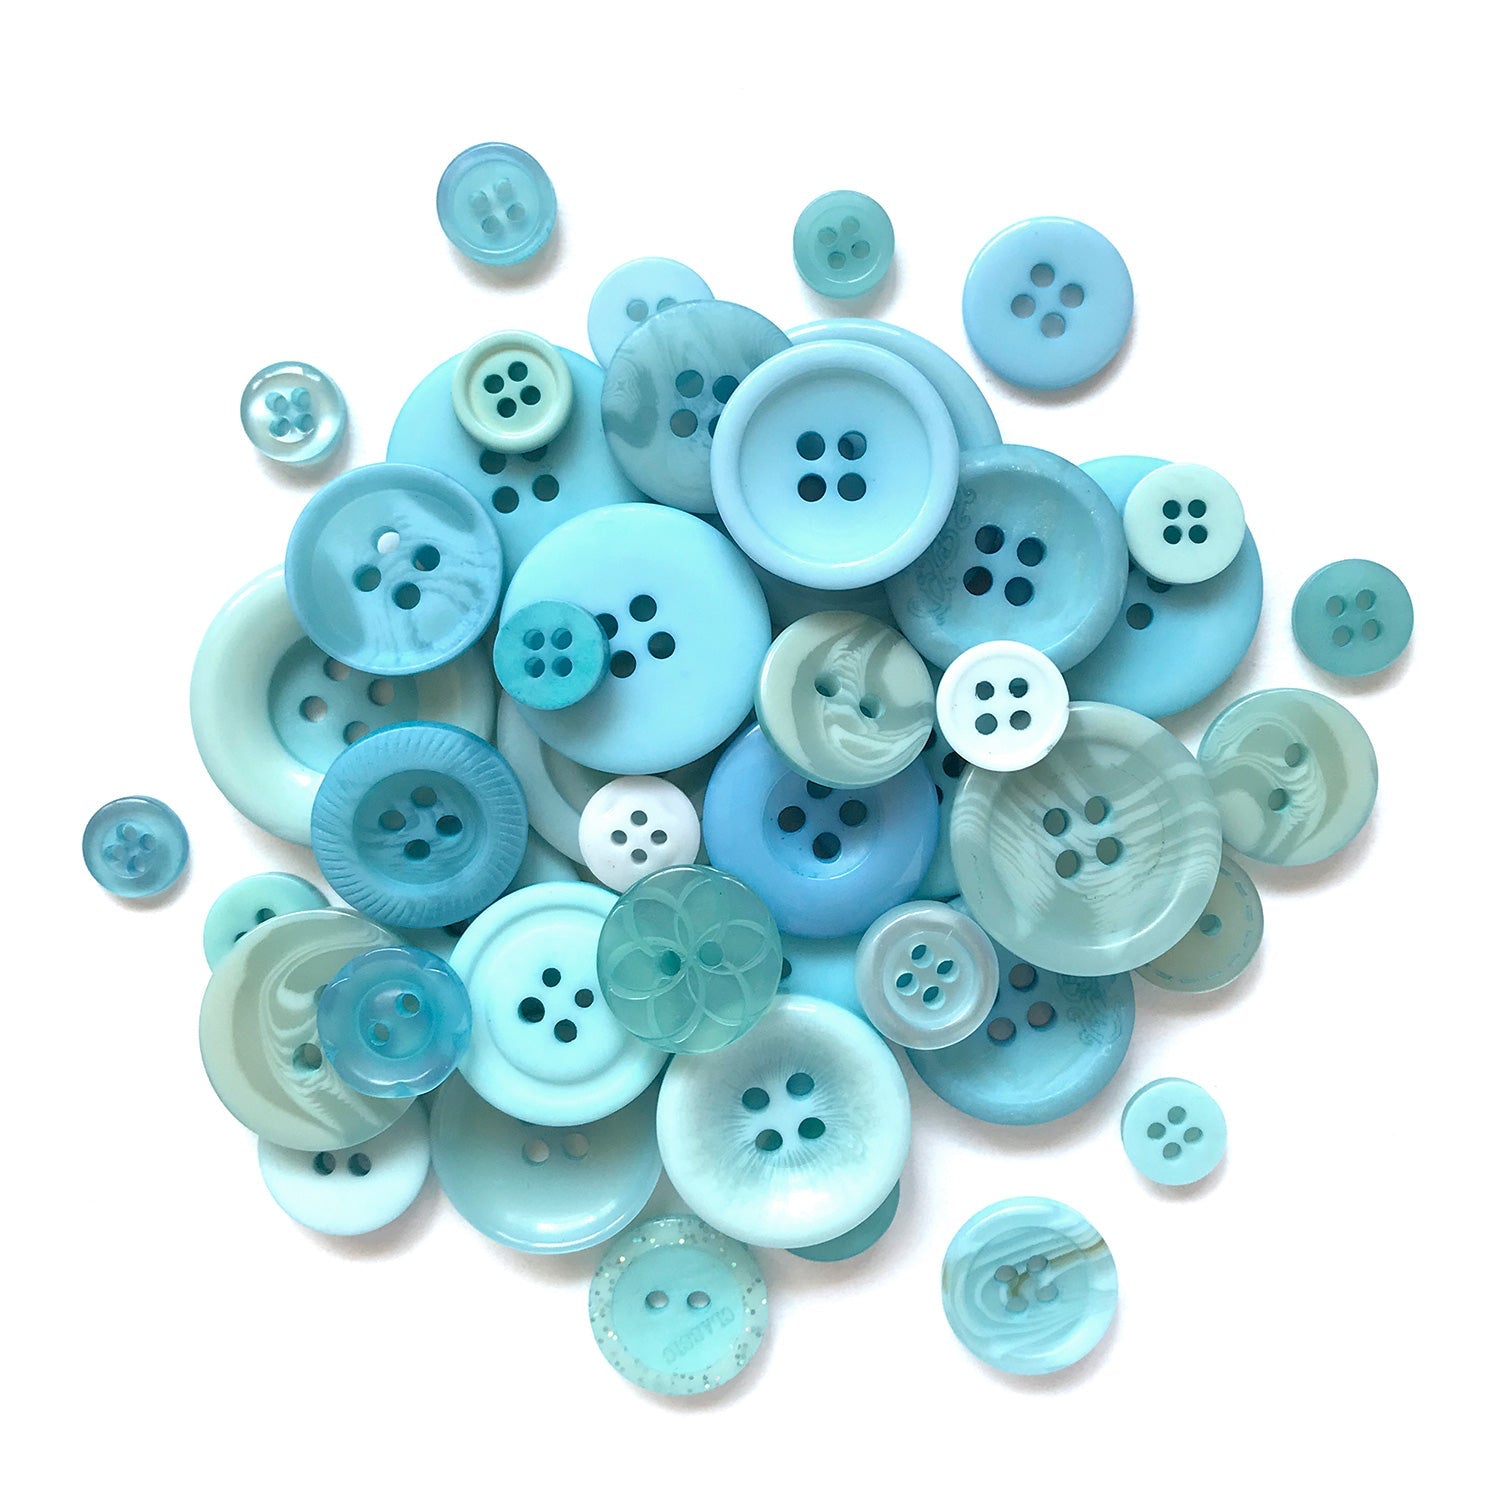 BLMHTWO Pack of 250 Colourful Buttons for Crafts Mixing Sizes and